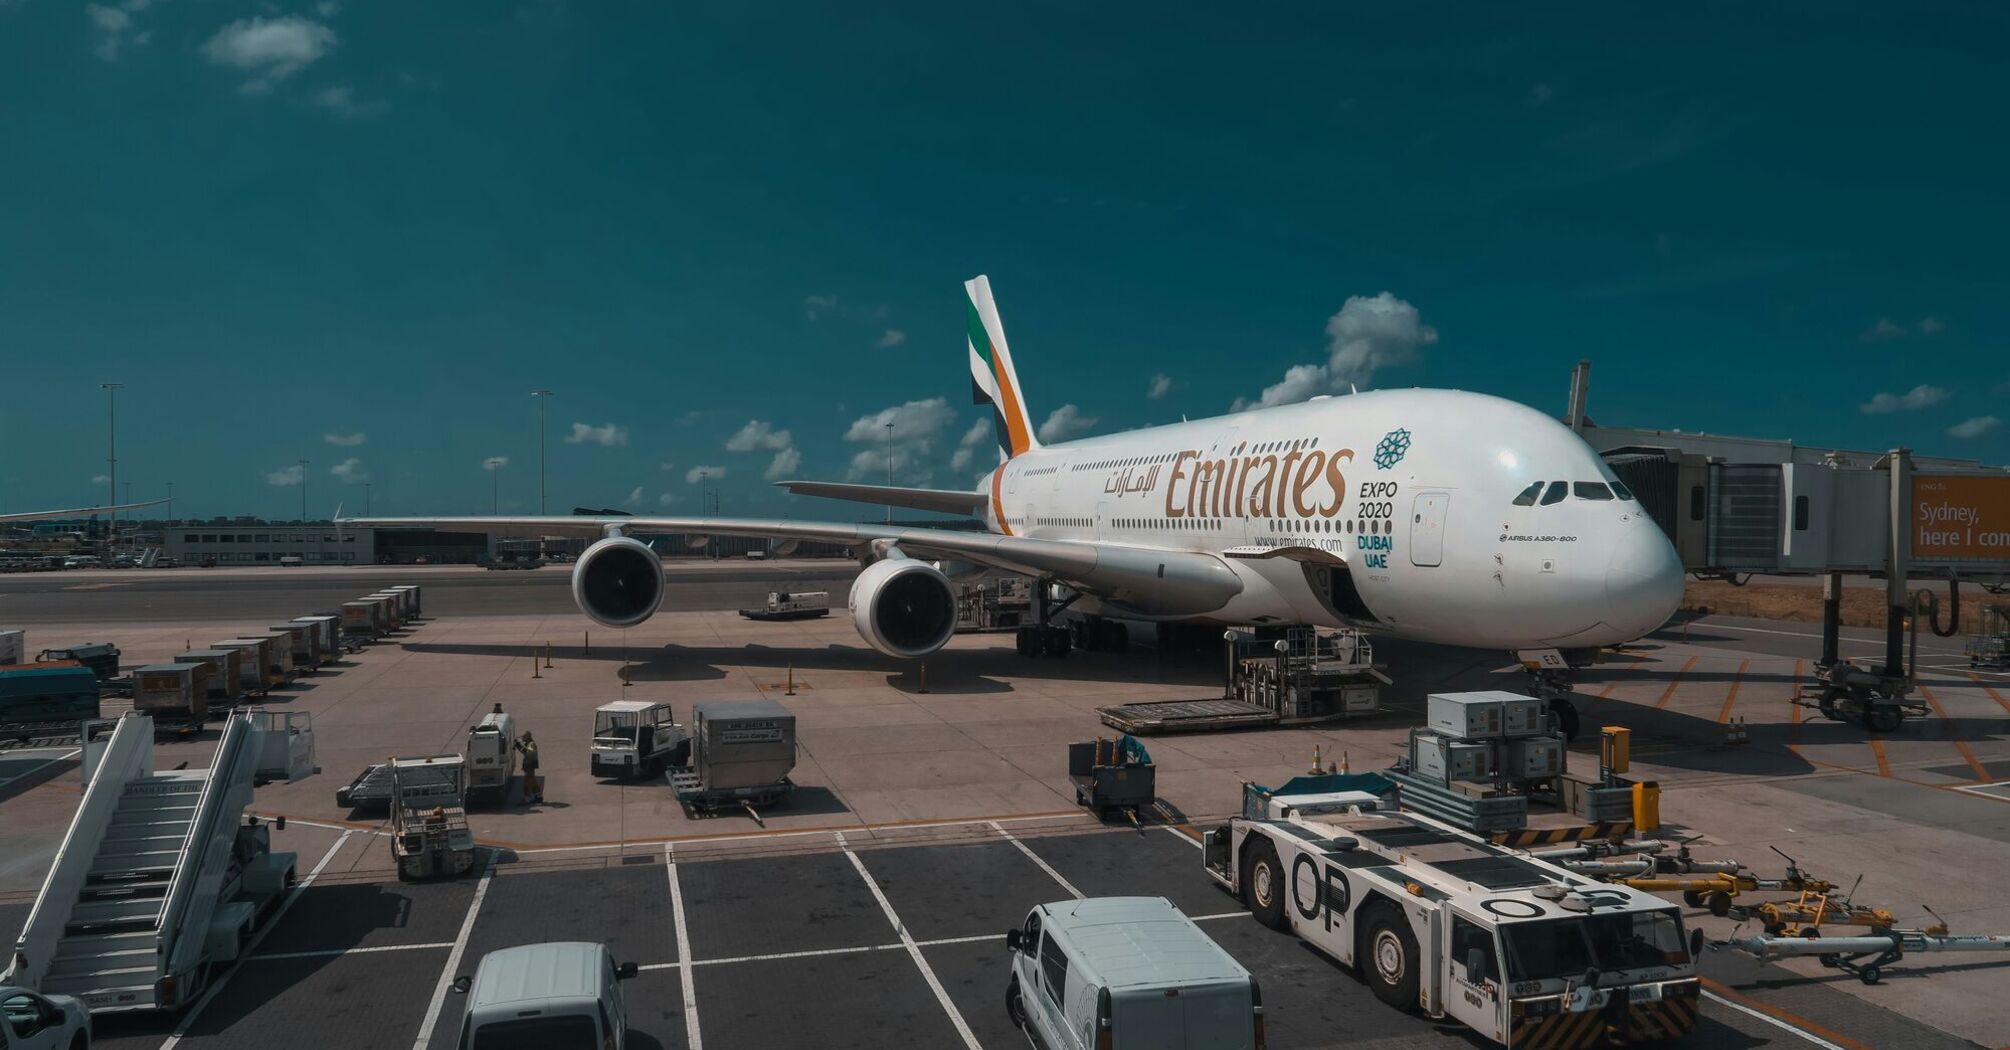 Emirates Airbus A380 parked at the gate with ground service vehicles around it